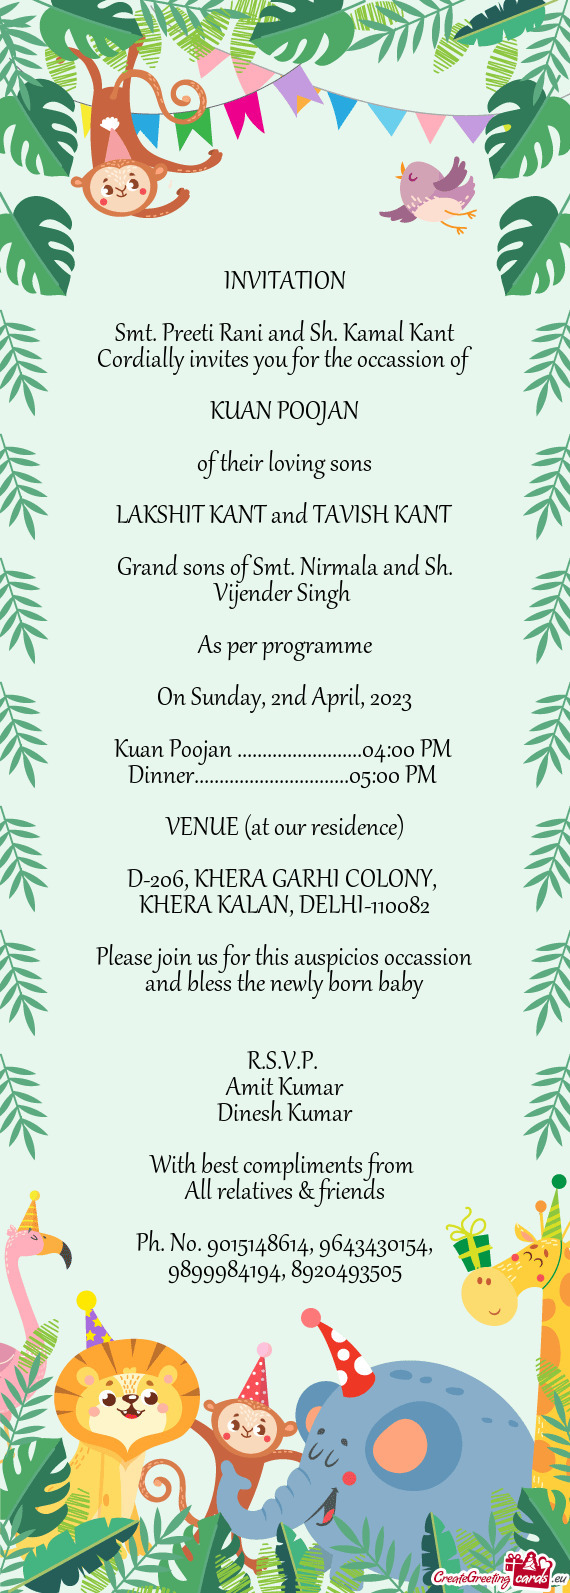 Cordially invites you for the occassion of